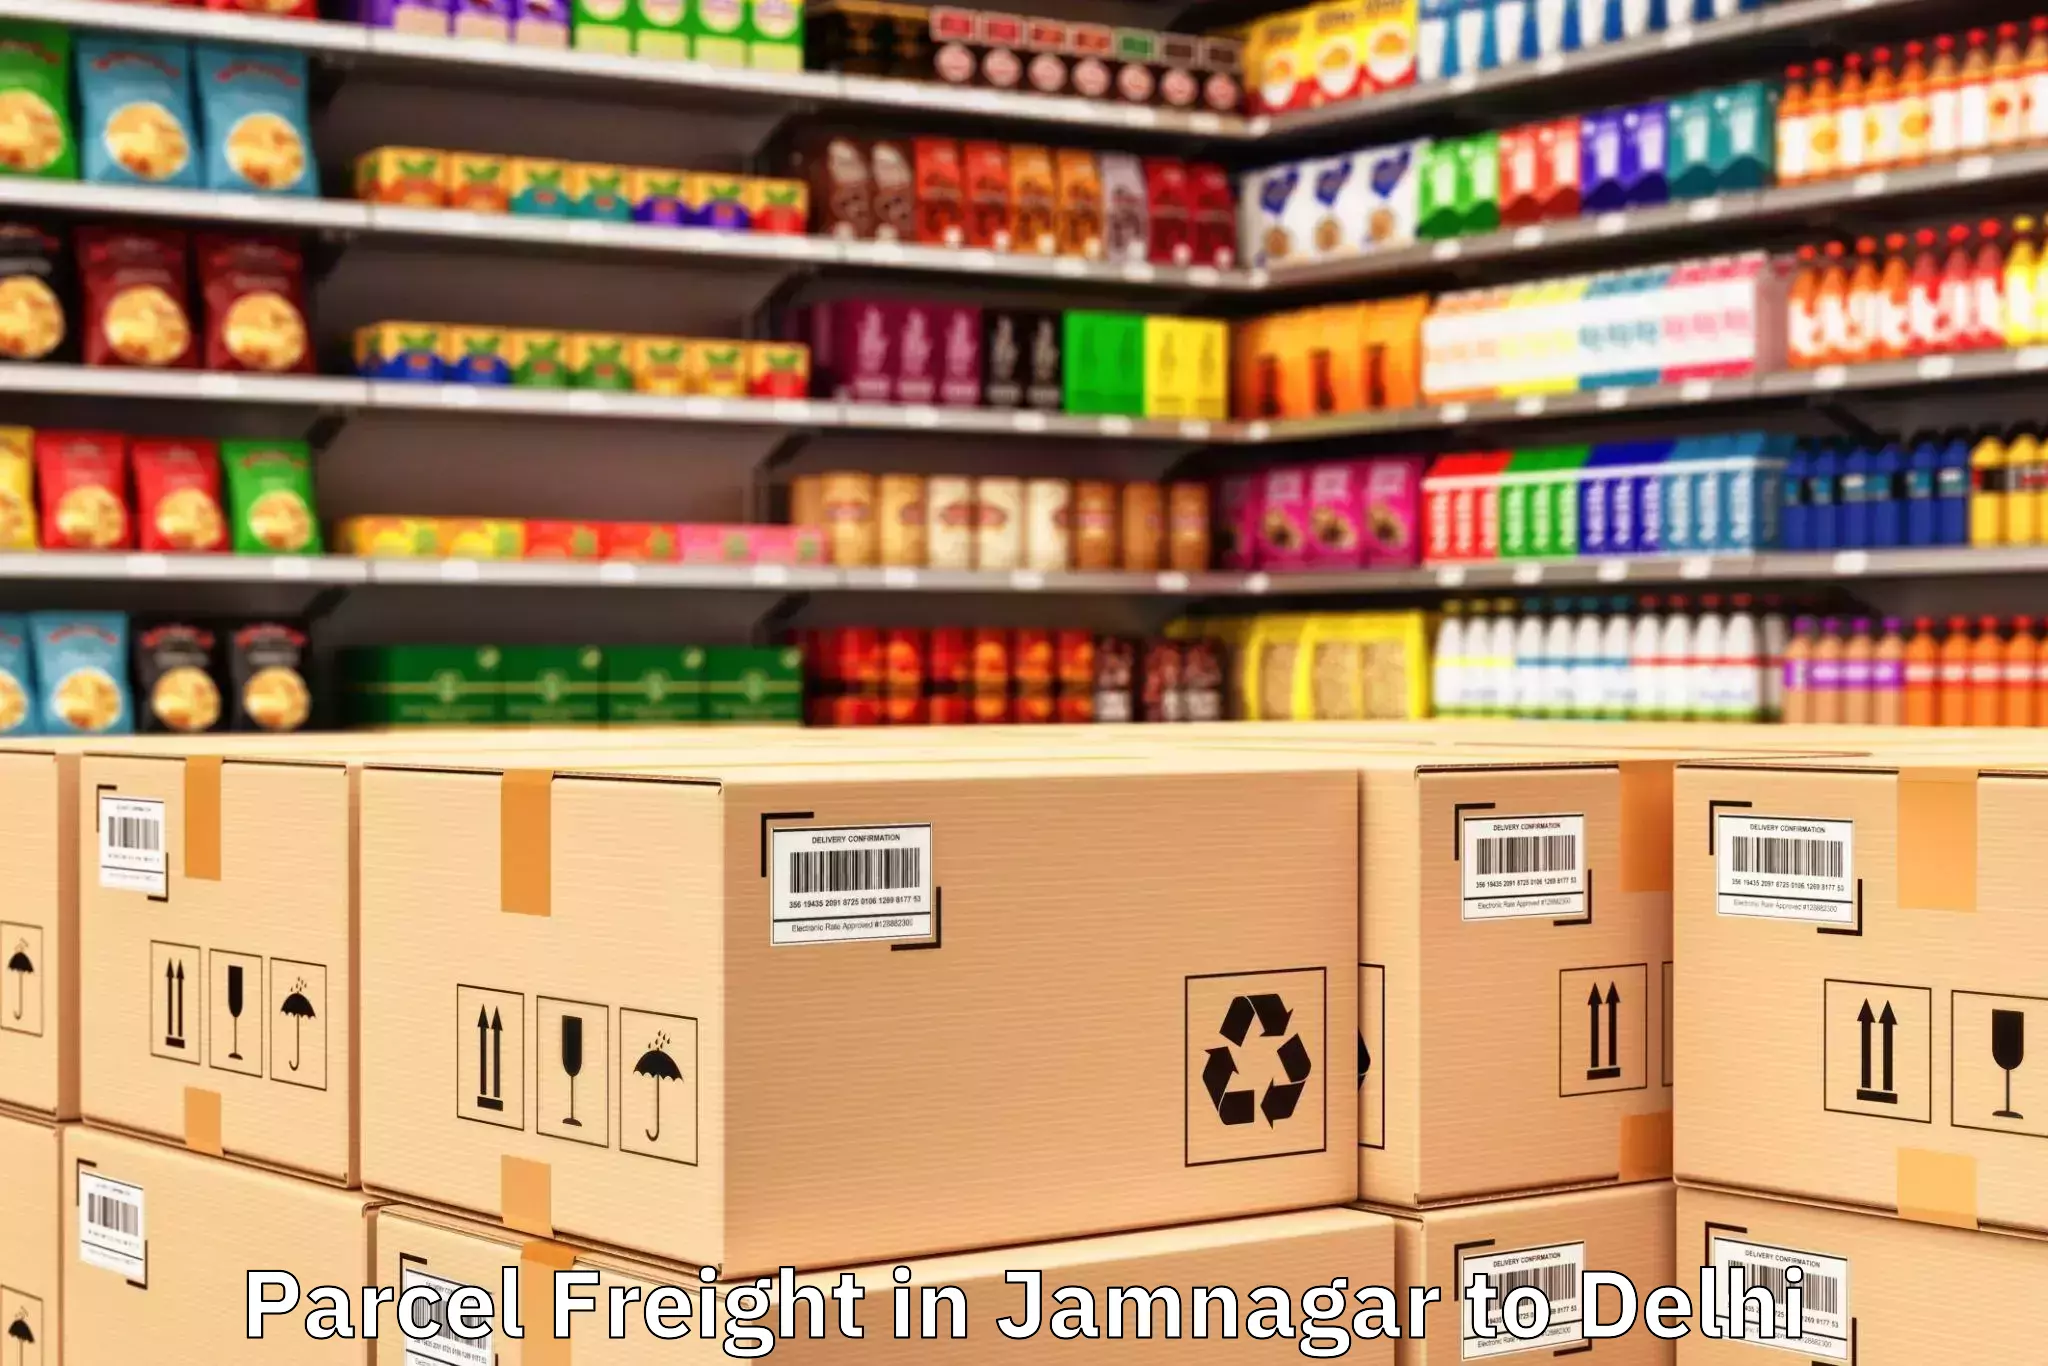 Top Jamnagar to Lodhi Road Parcel Freight Available